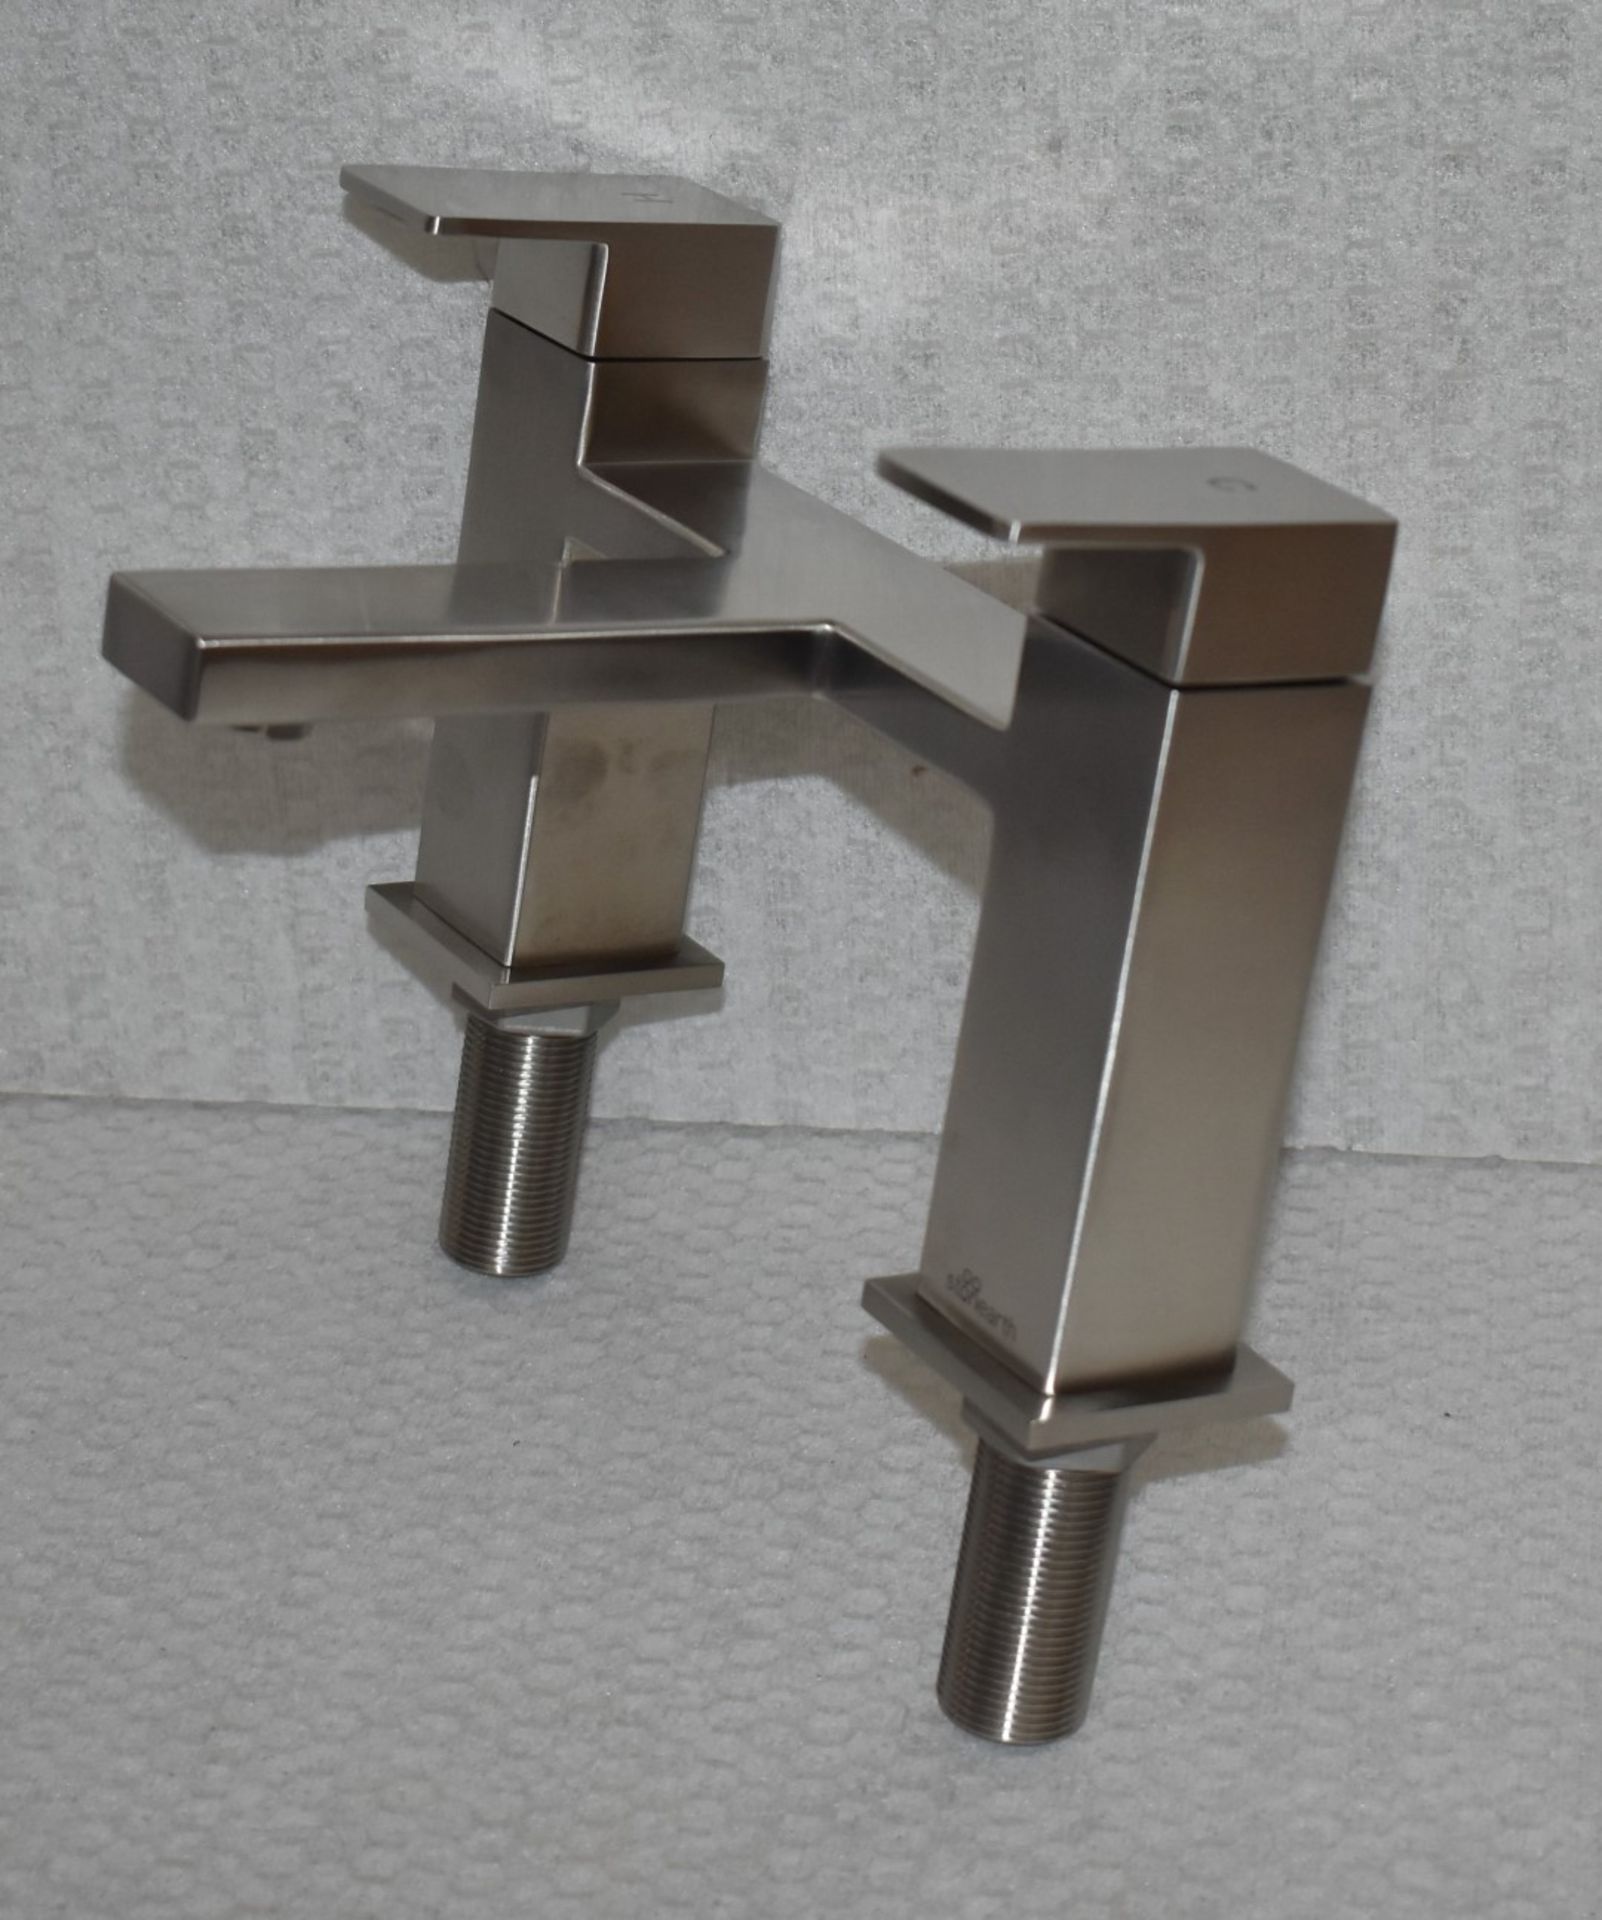 1 x Stonearth 'Metro' Stainless Steel Bath Filler Mixer Tap - Brand New & Boxed - RRP £340 - Ref: - Image 11 of 14